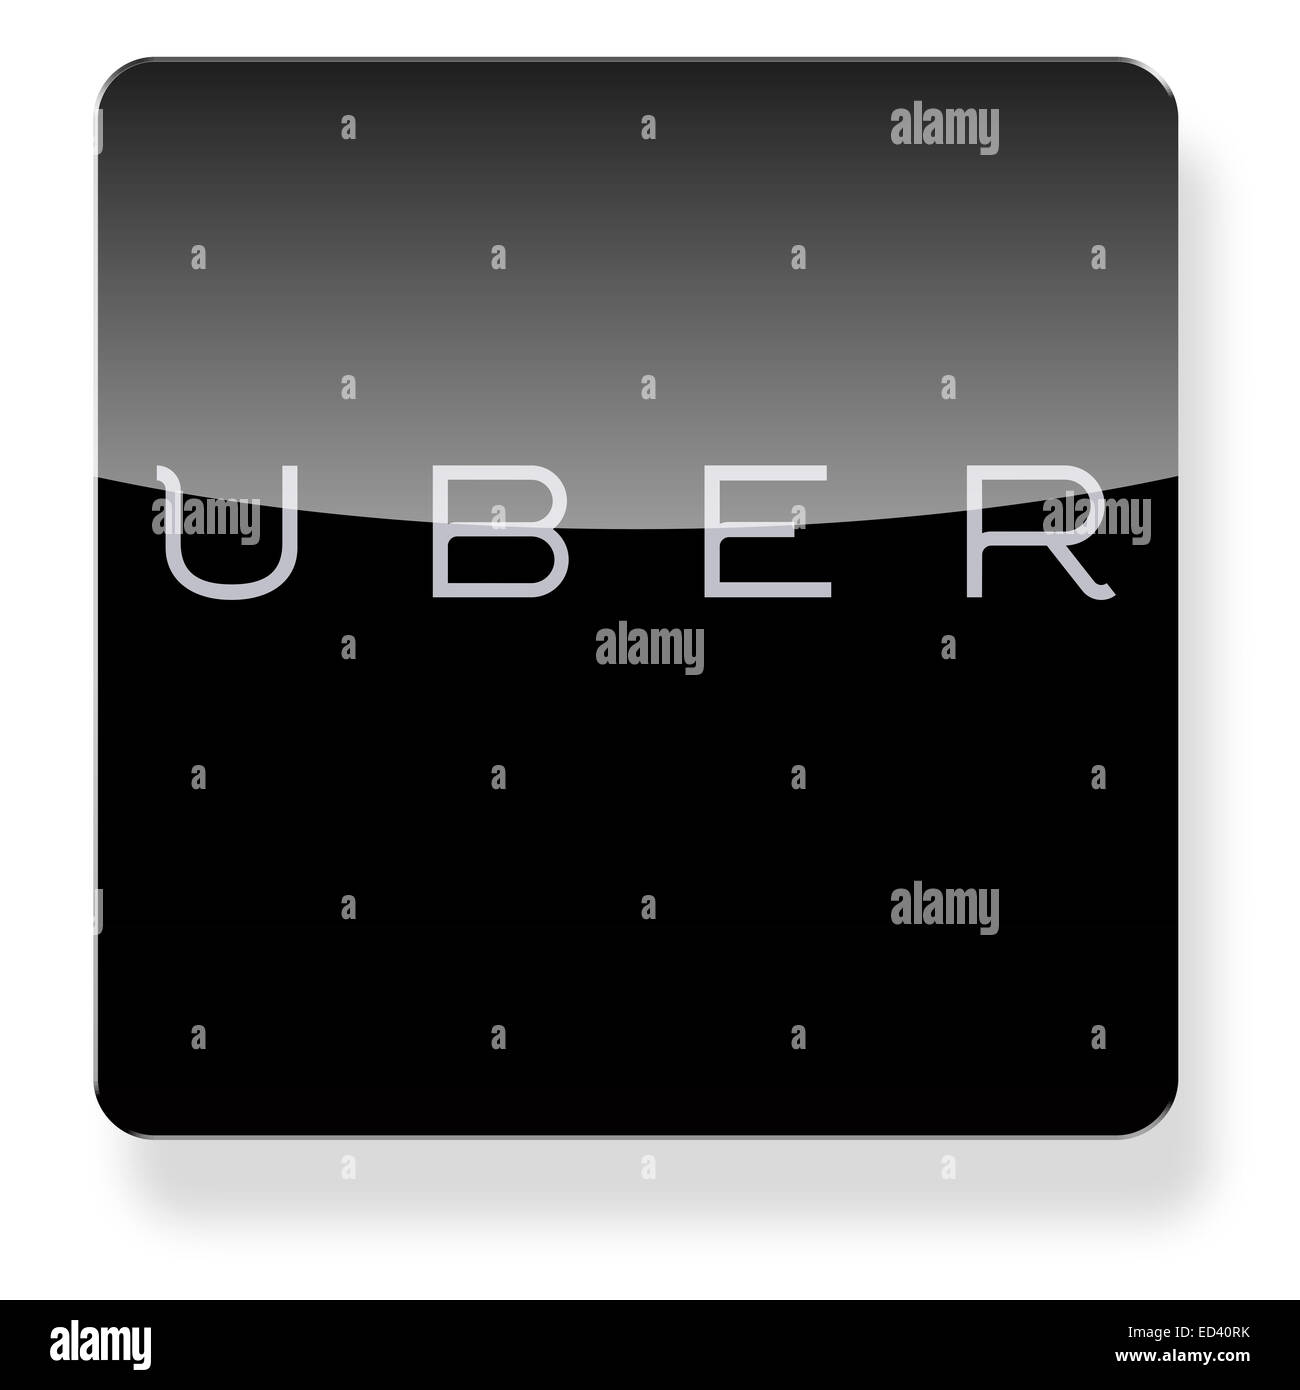 Uber as an app icon. Clipping path included. Stock Photo